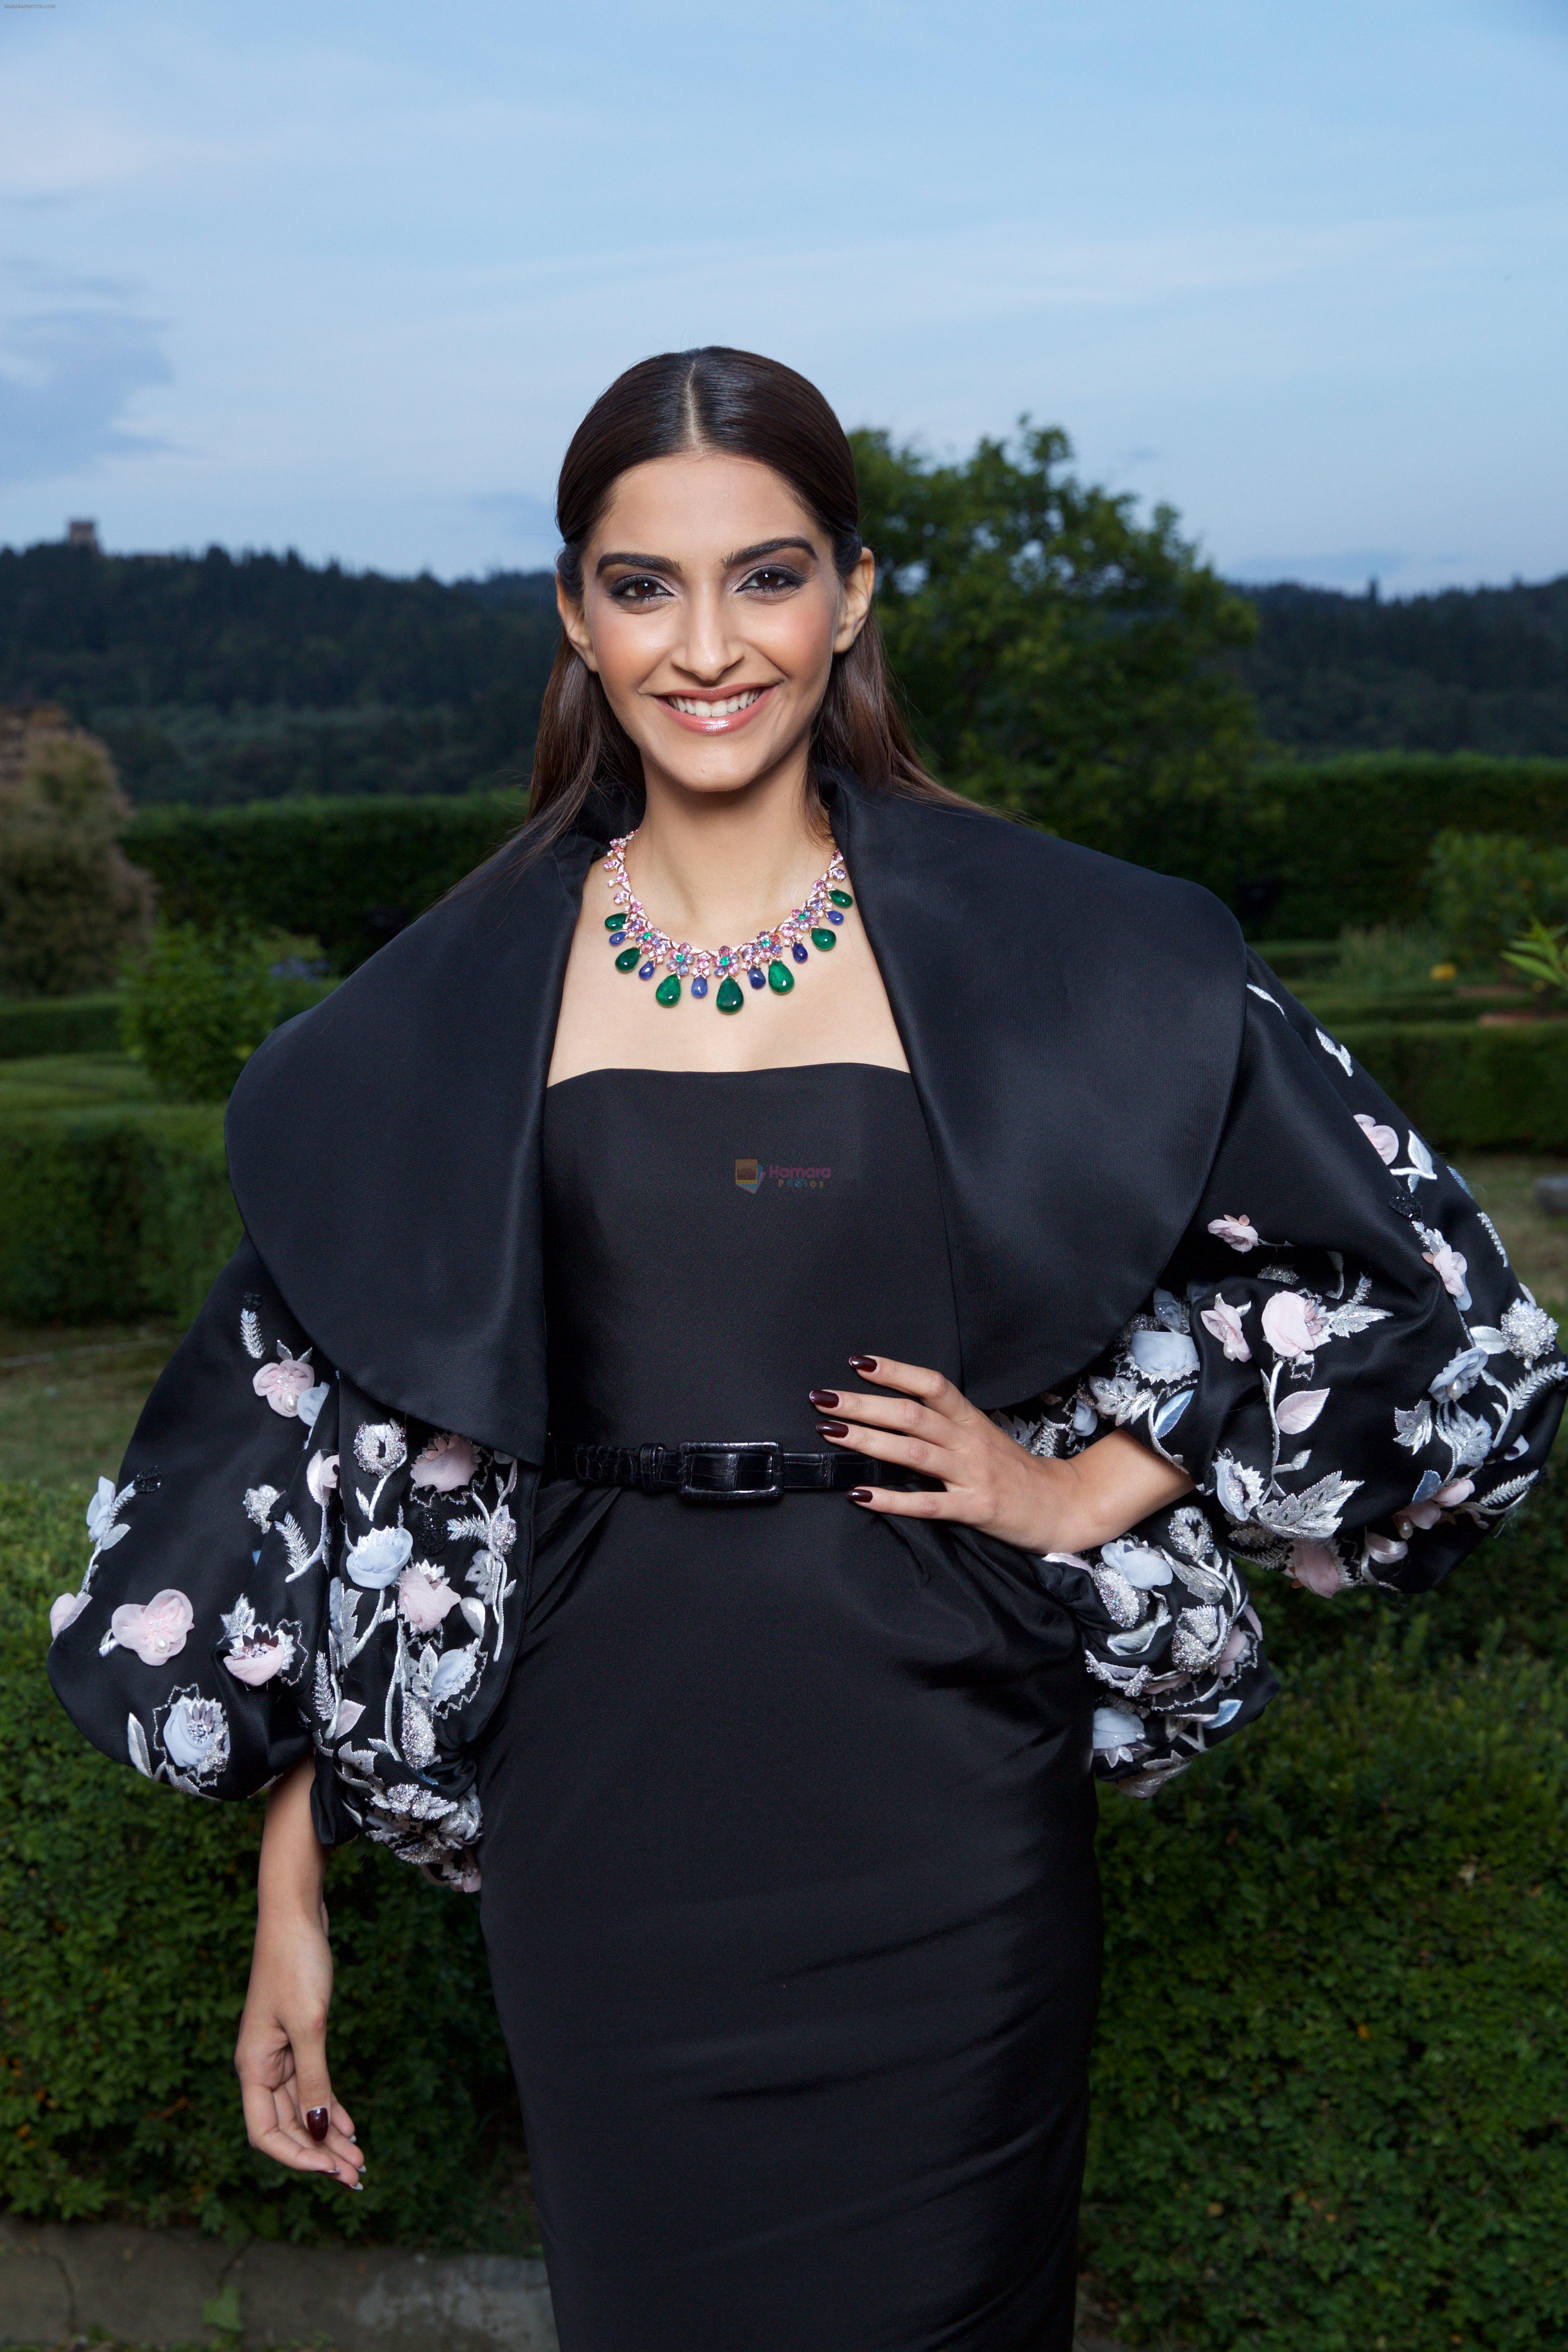 Sonam Kapoor unveiled Bulgari's new High Jewellery collection inspired by the art of the Italian gardens in Villa Di Maiano, Florence on 14th June 2015